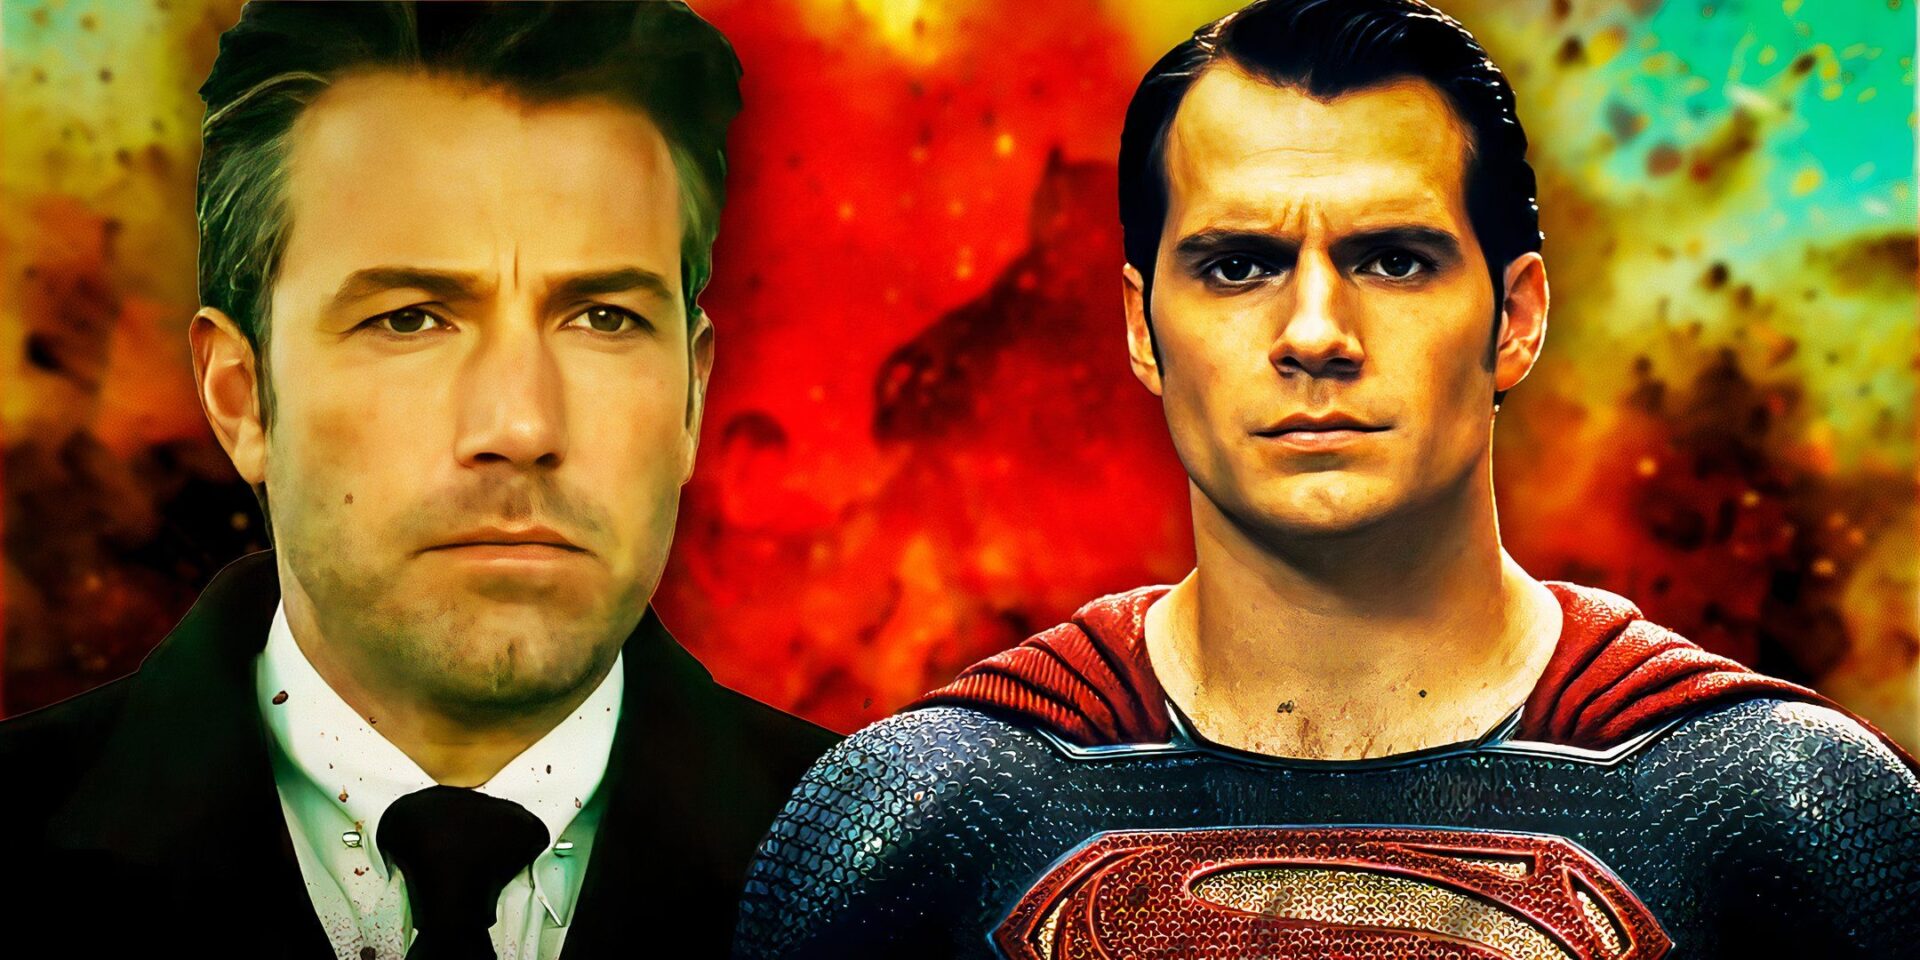 Batman V Superman: Dawn Of Justice Cast - Where Are They Now?